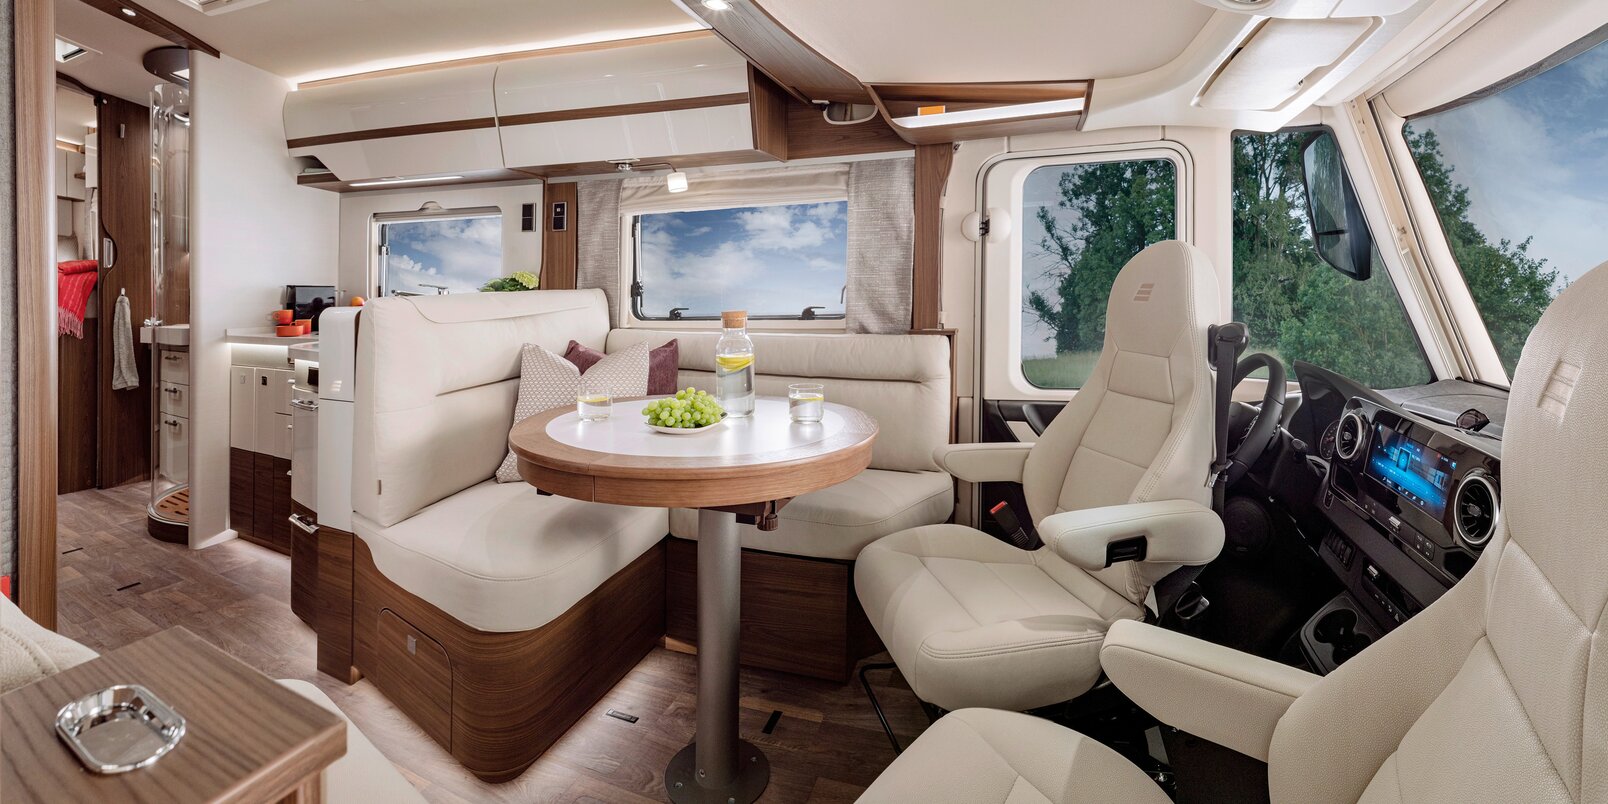 Living room in the HYMER-B-MasterLine with a round table and seating in cream-colored leather